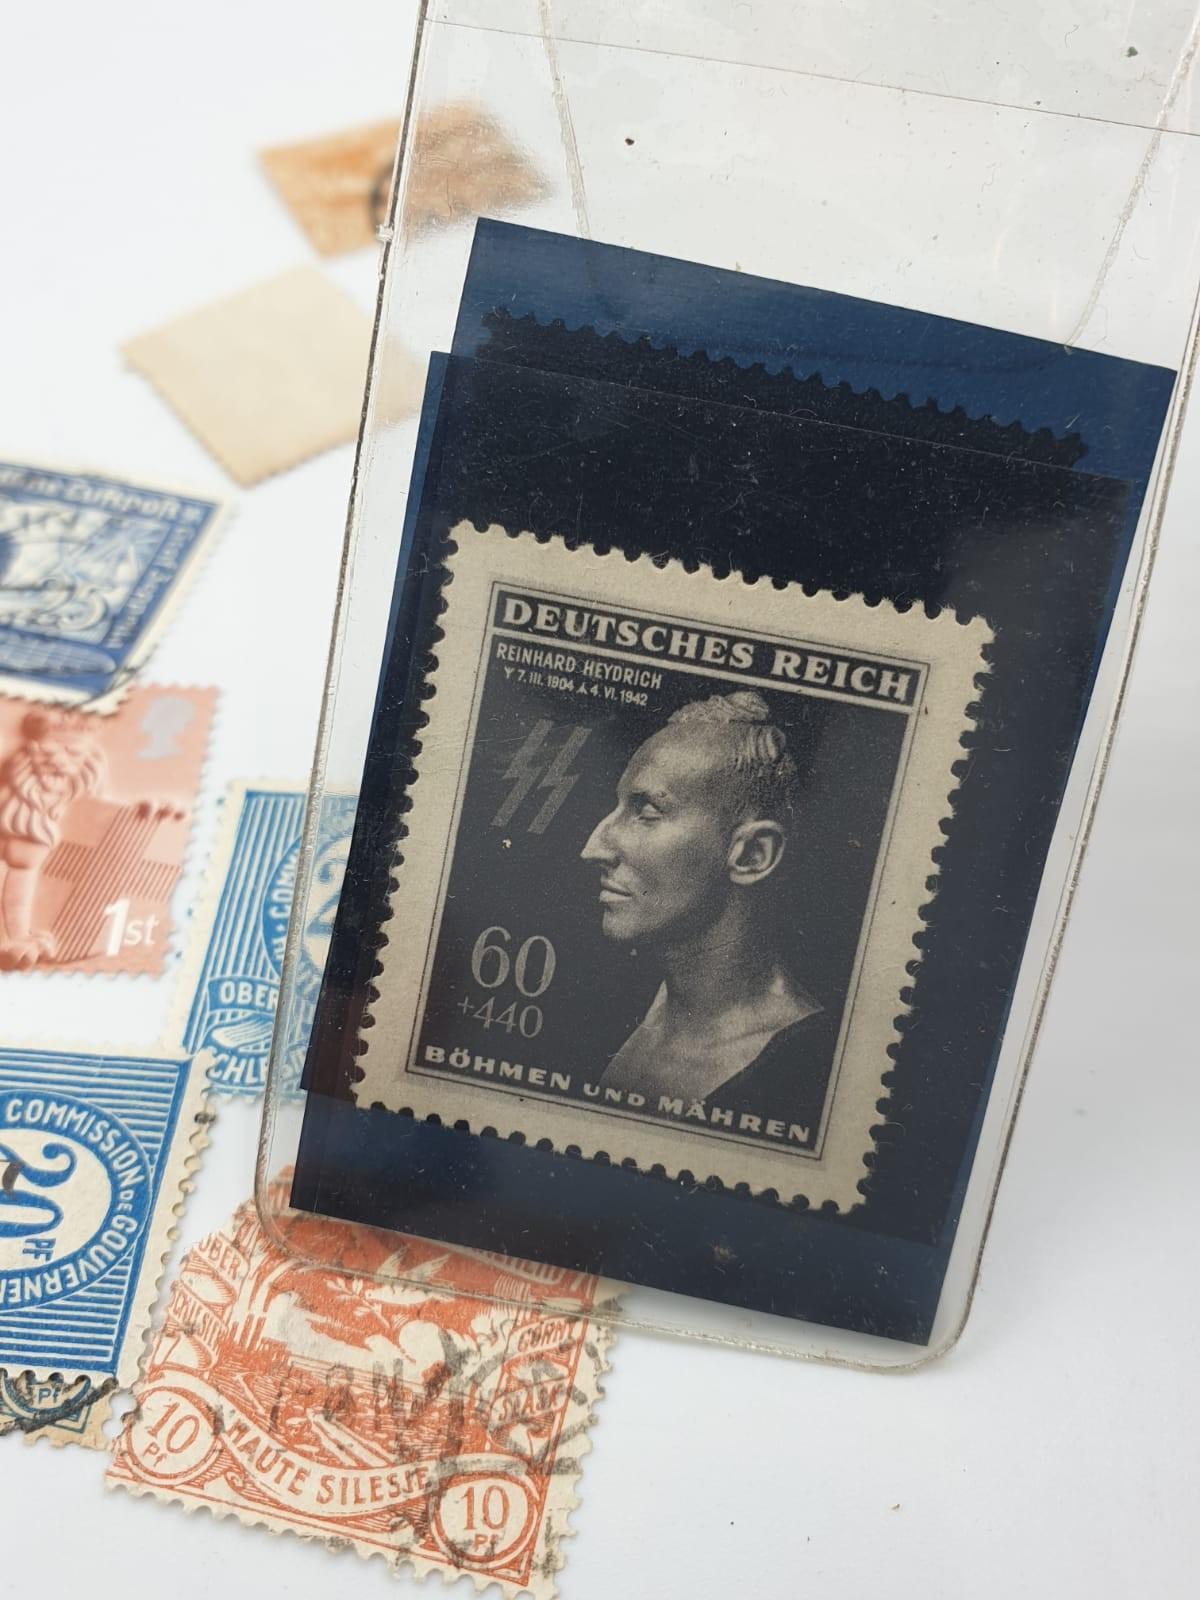 Assortment of 12 German postage stamps from 1930s to include unused Hitler mussolini stamp. - Bild 2 aus 2